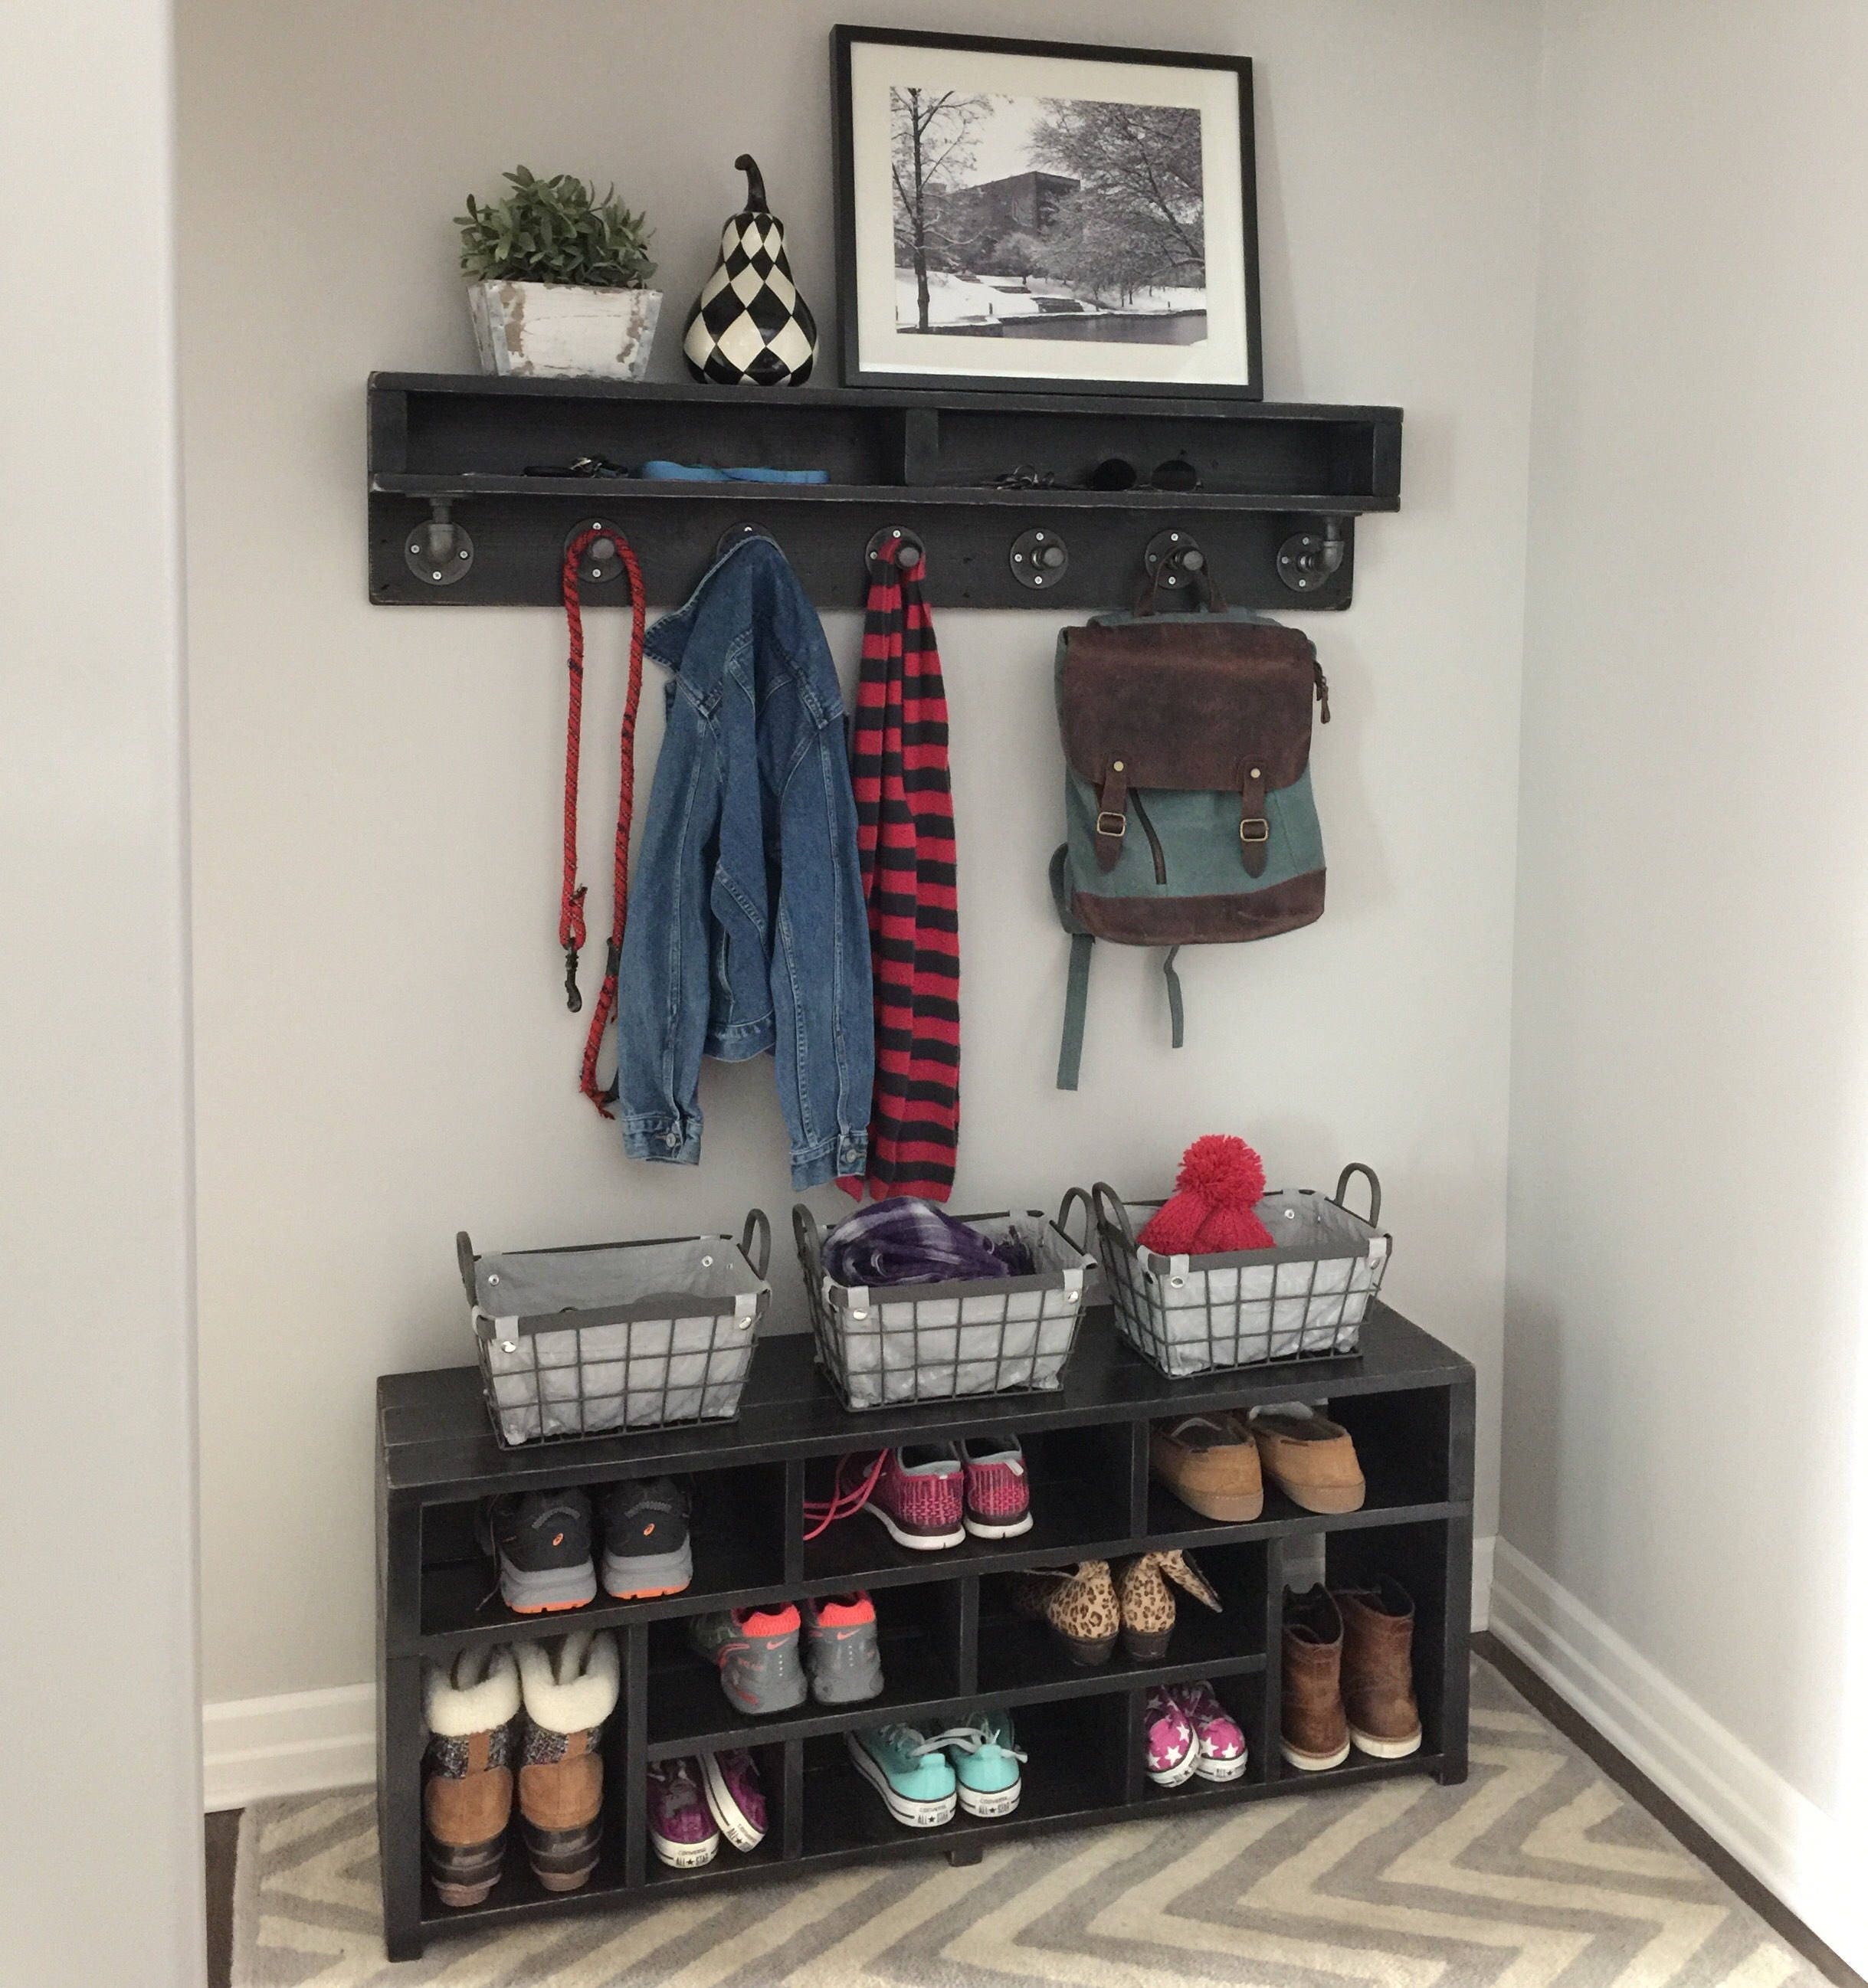 Entryway Shoe Bench 18-Cube Shoe Storage Organizer with Wall